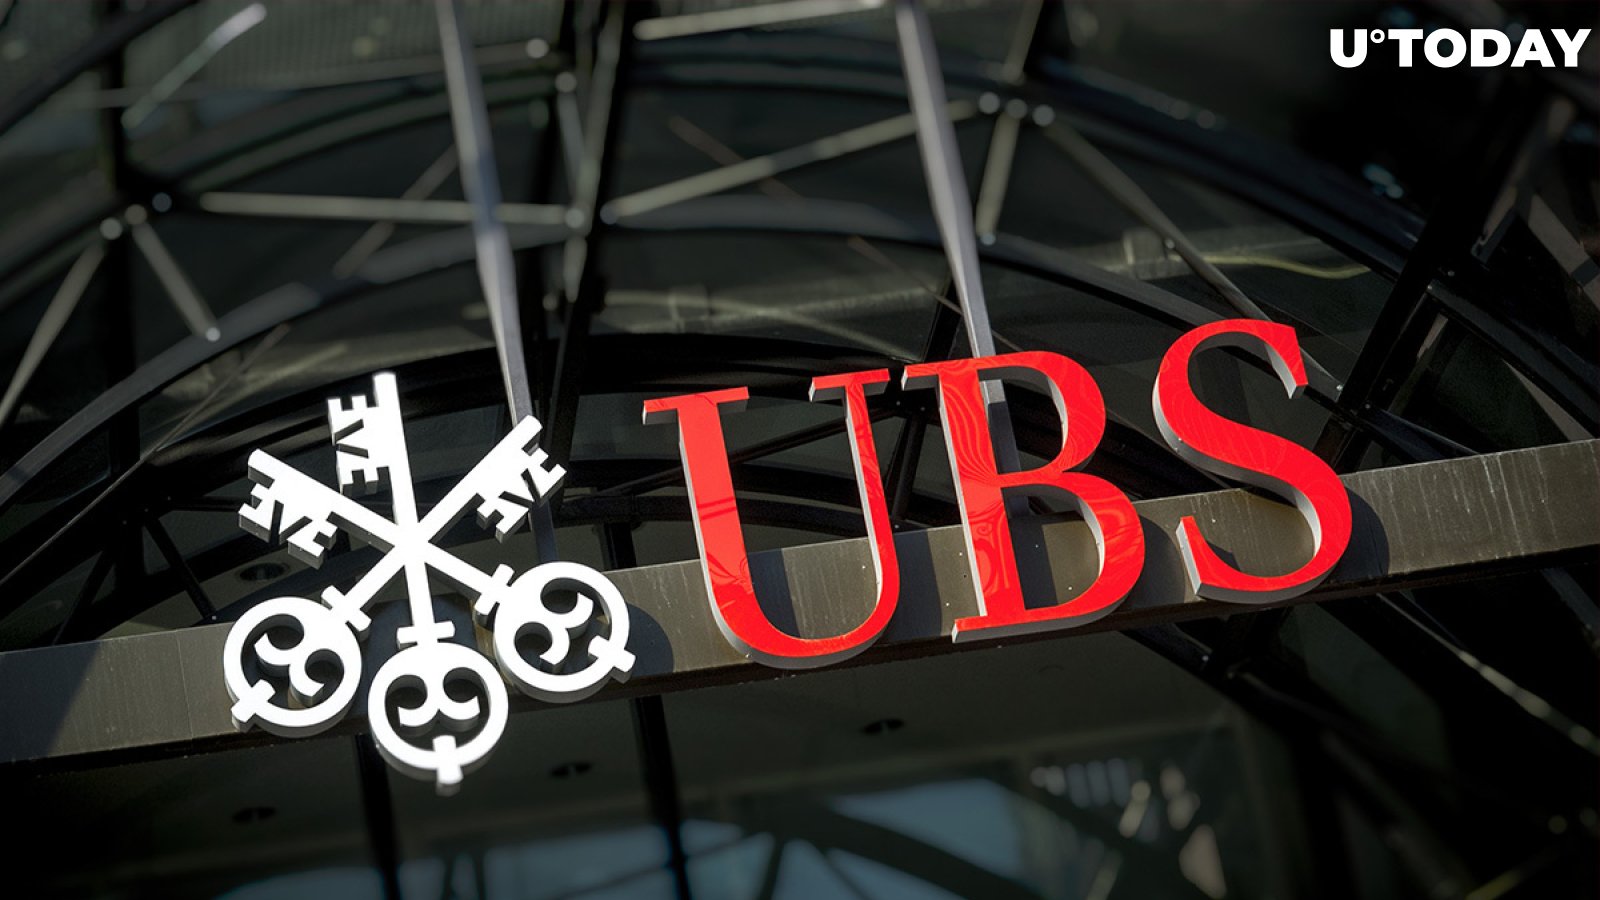 UBS CEO Has No Bitcoin FOMO, Says Crypto Is Untested Asset Category